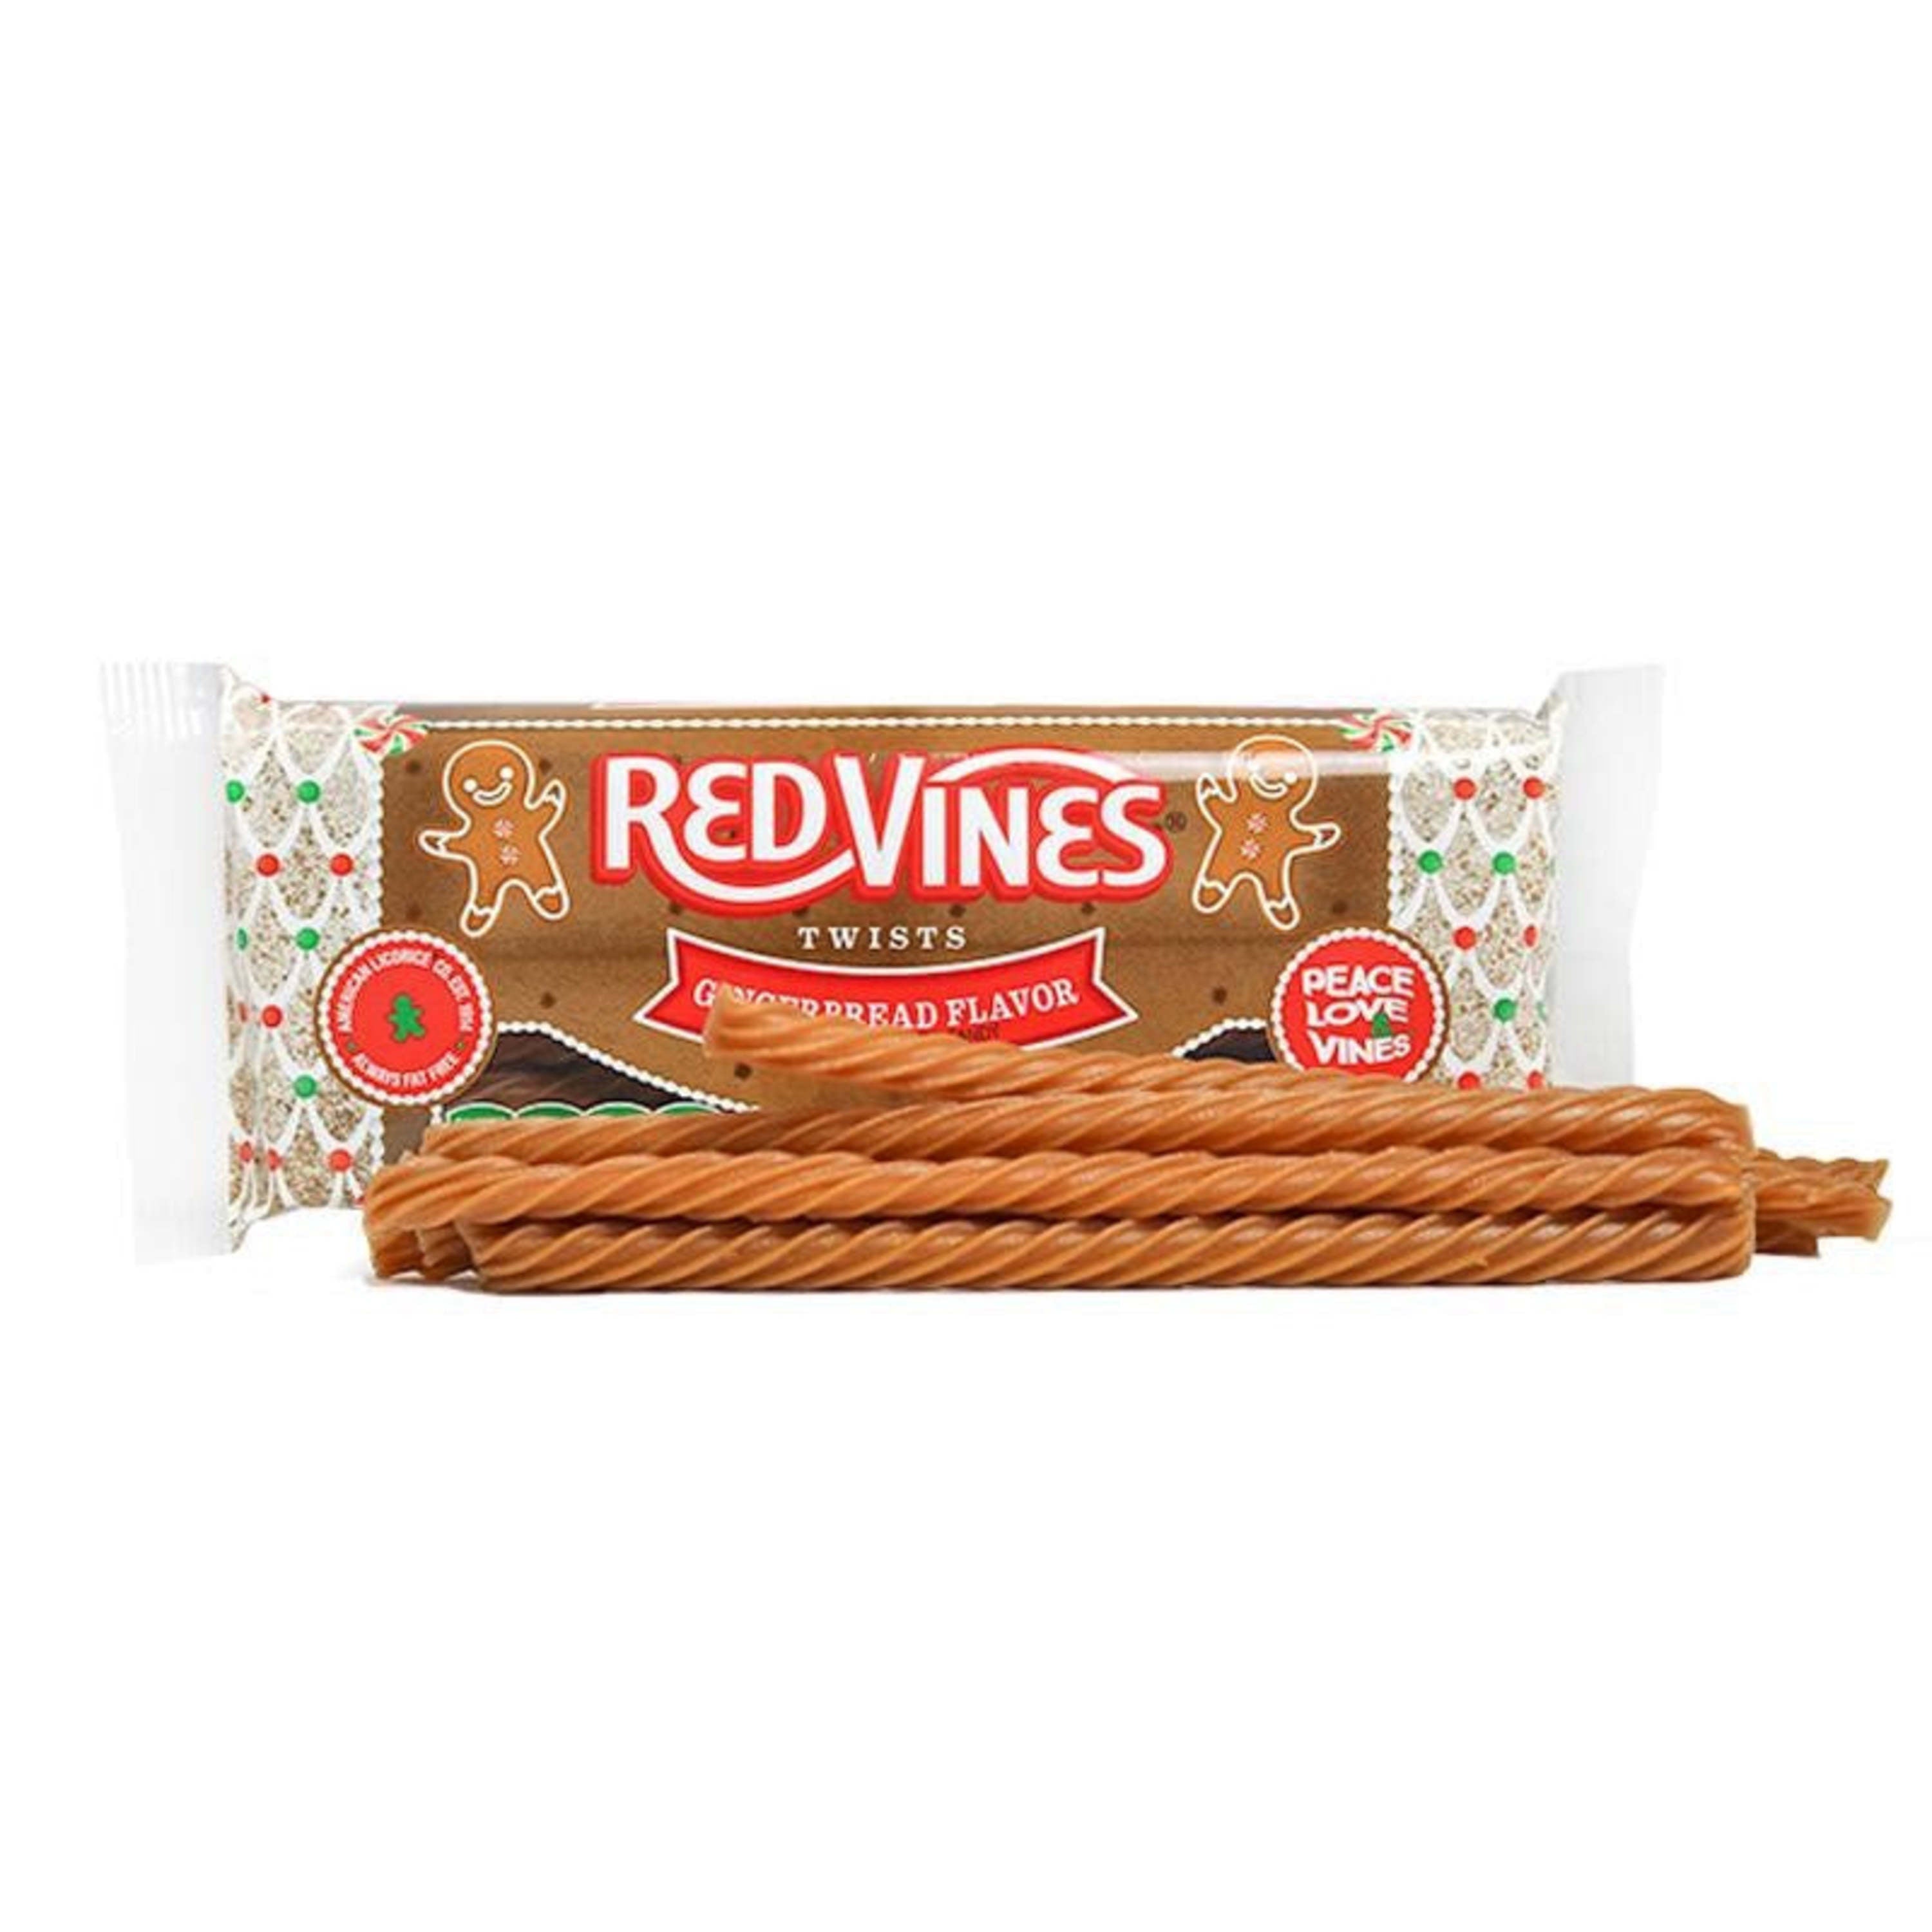 RED VINES Gingerbread flavored licorice twists - raw licorice candy on a festive background